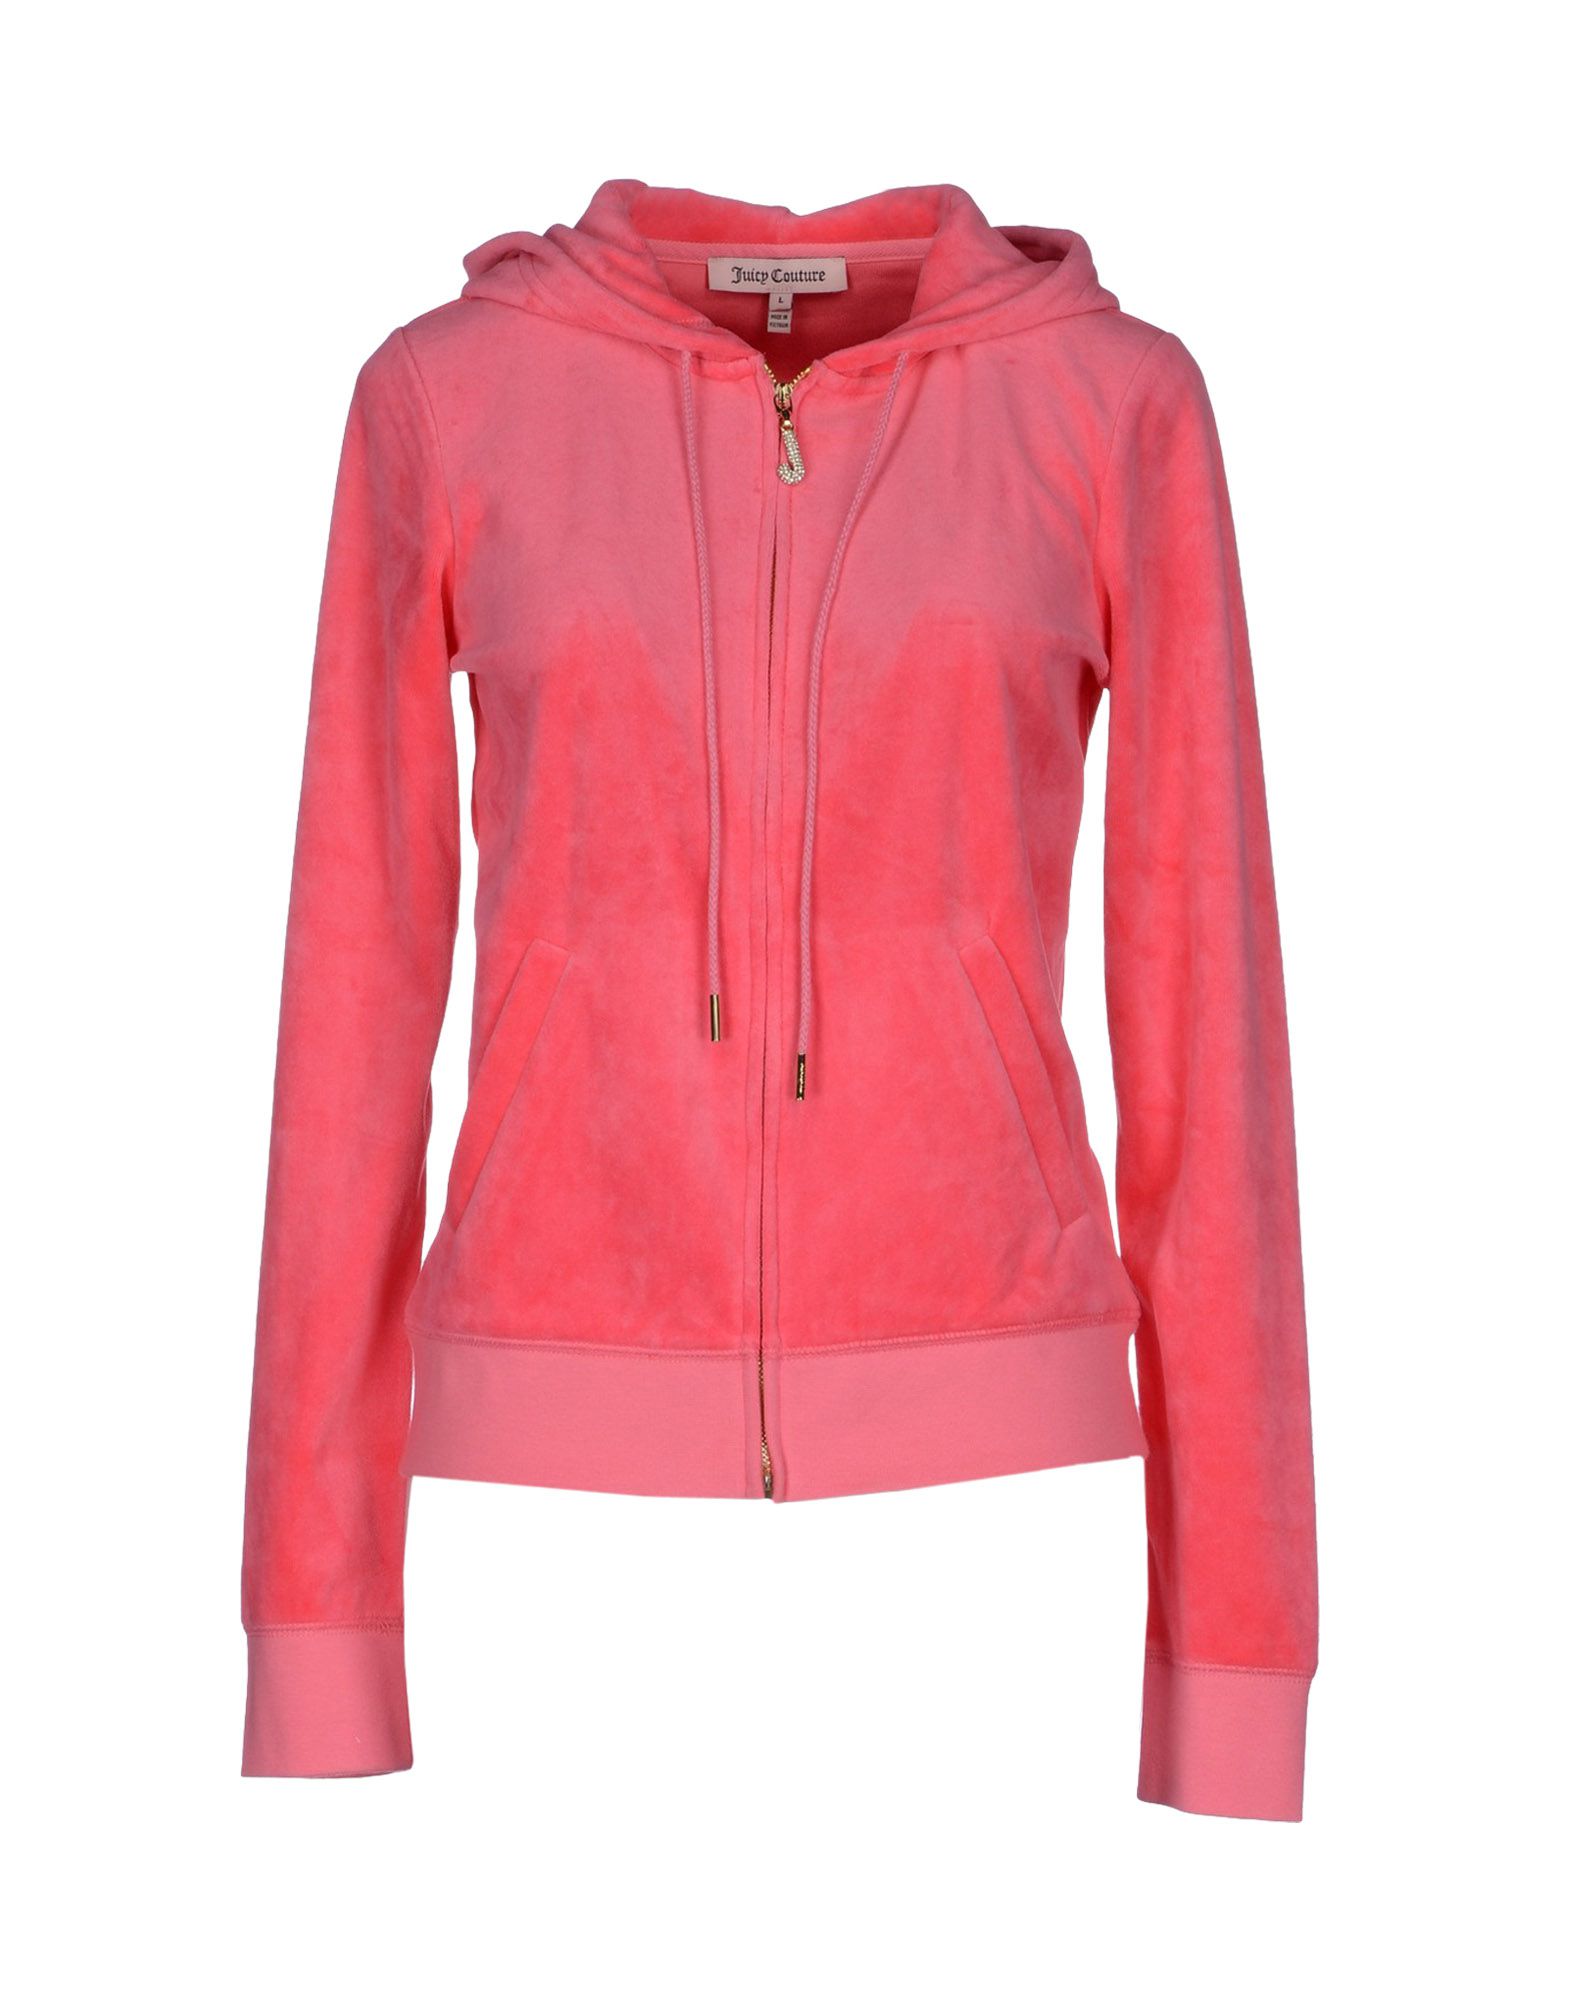 Juicy Couture Hooded Sweatshirt in Pink (Fuchsia) | Lyst